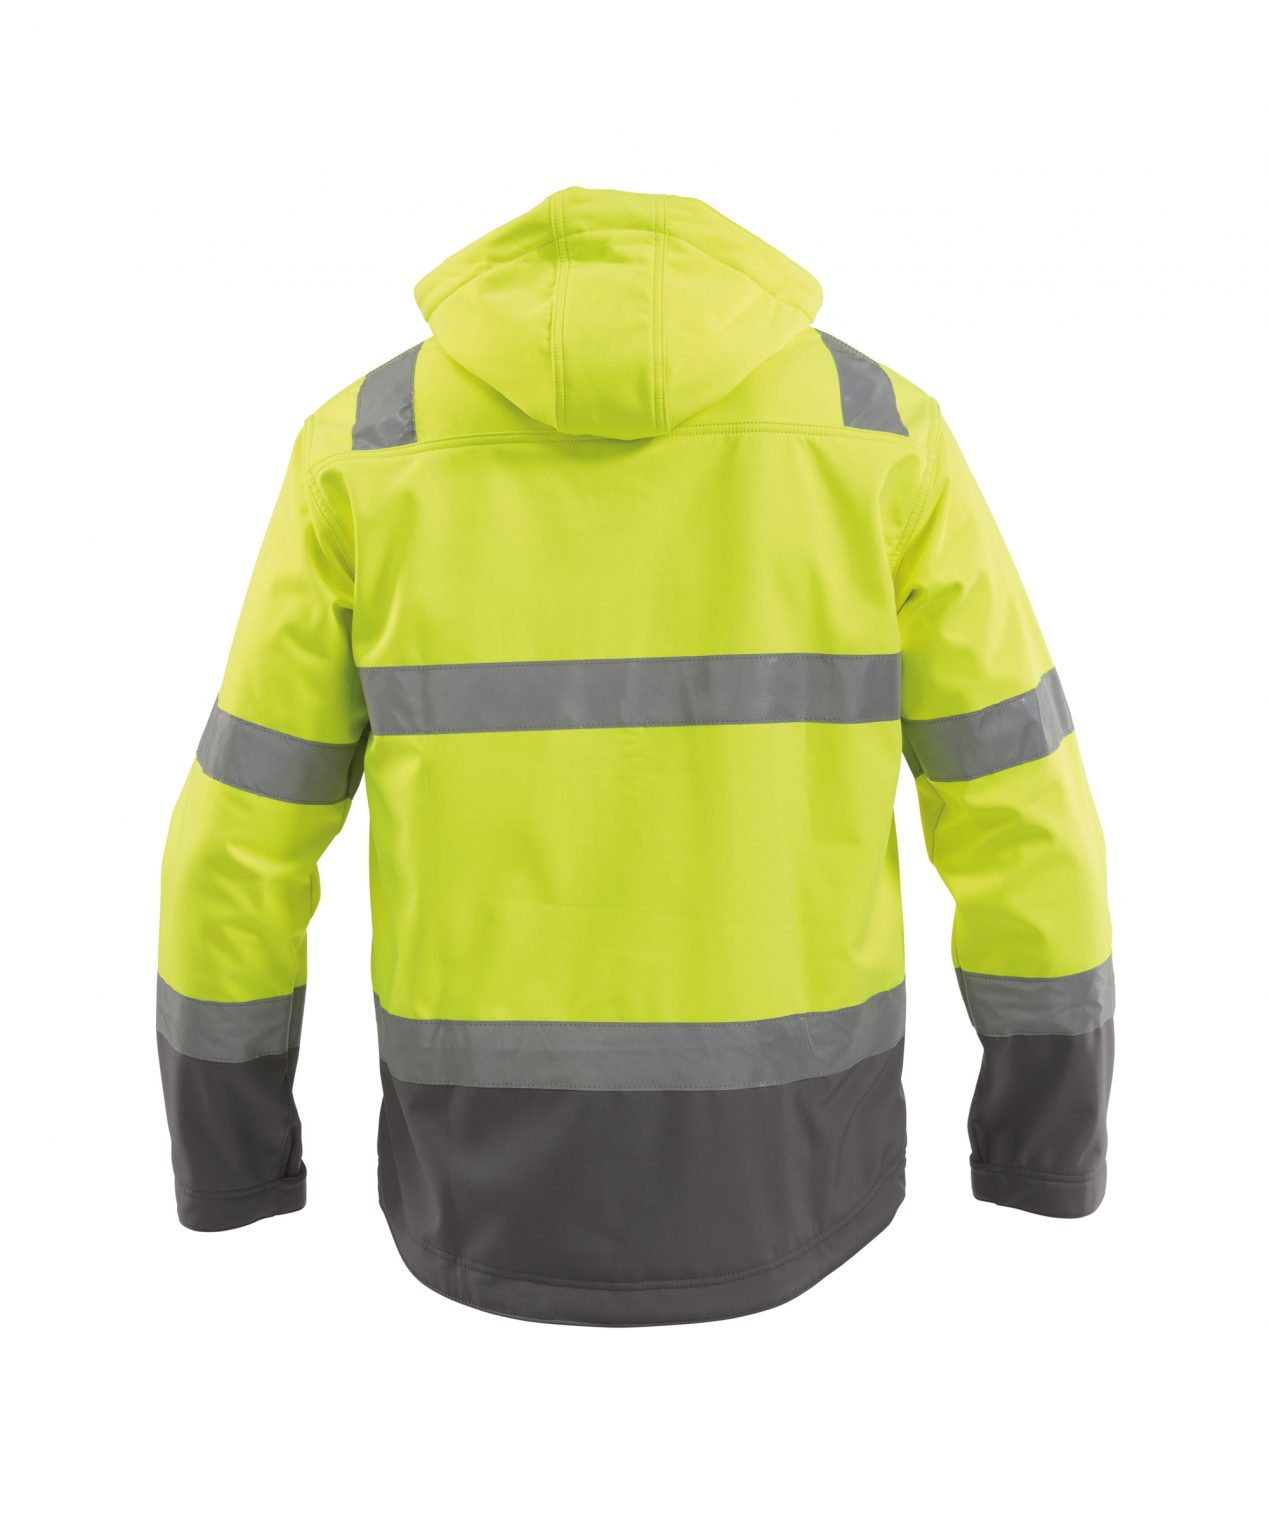 malaga high visibility softshell jacket fluo yellow cement grey back